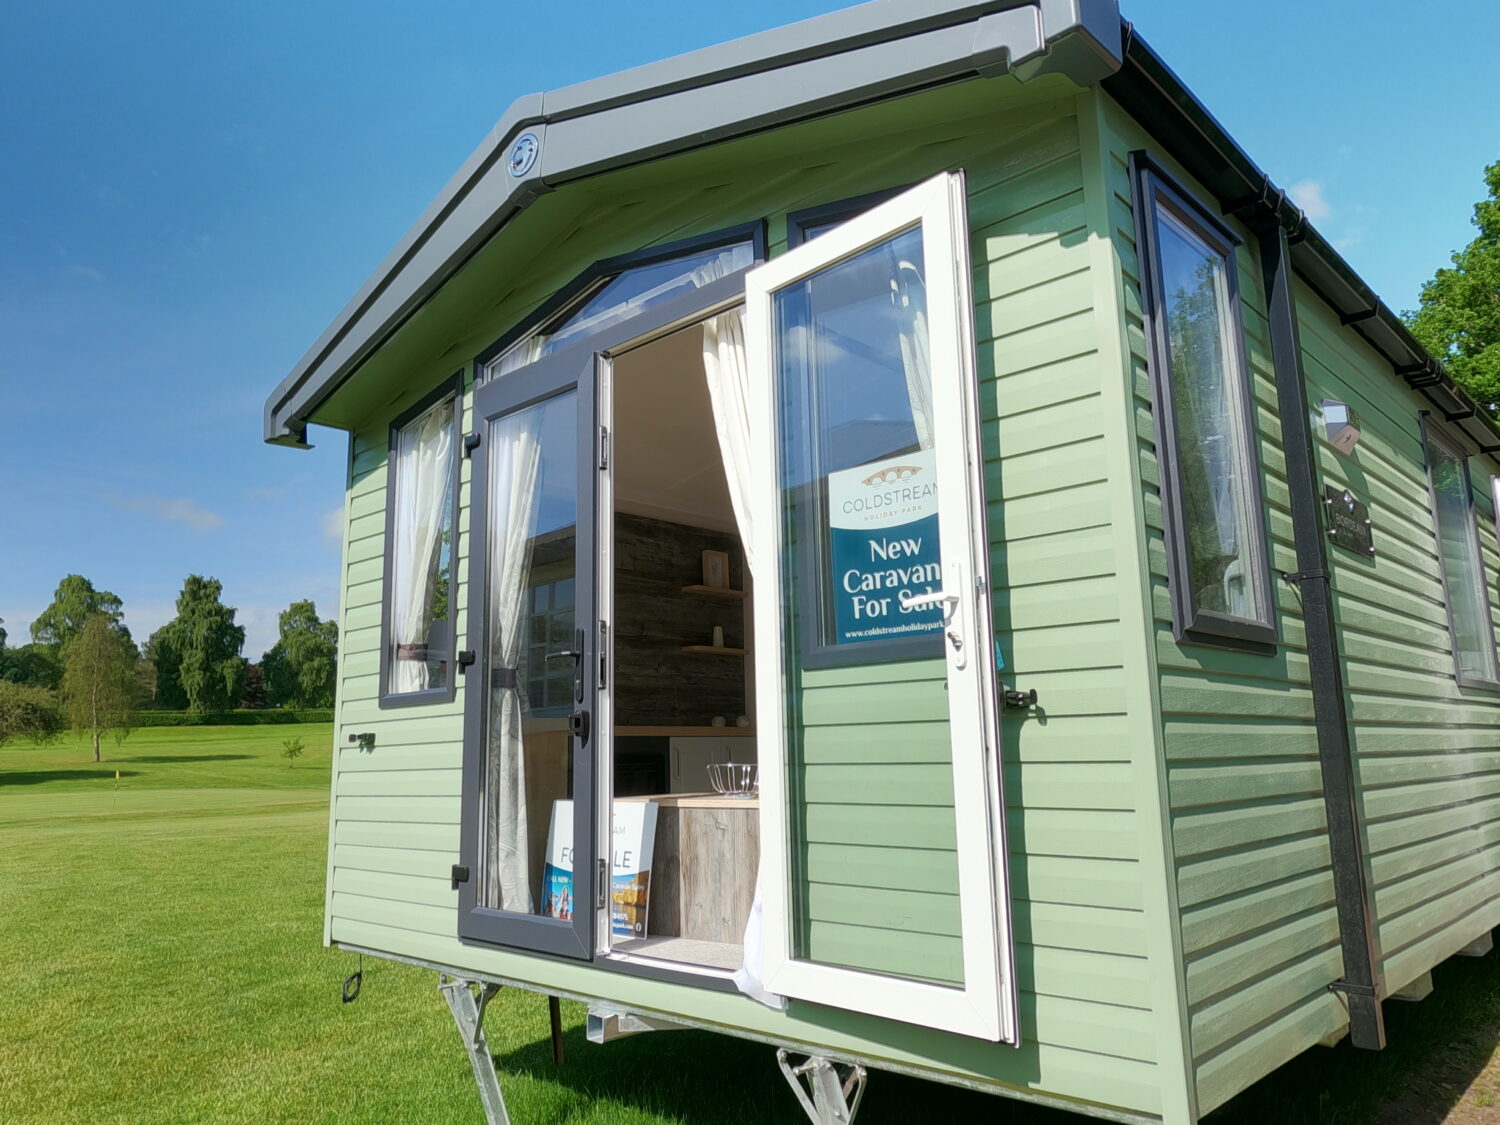 Coldstream holiday park news - How to search our sales stock